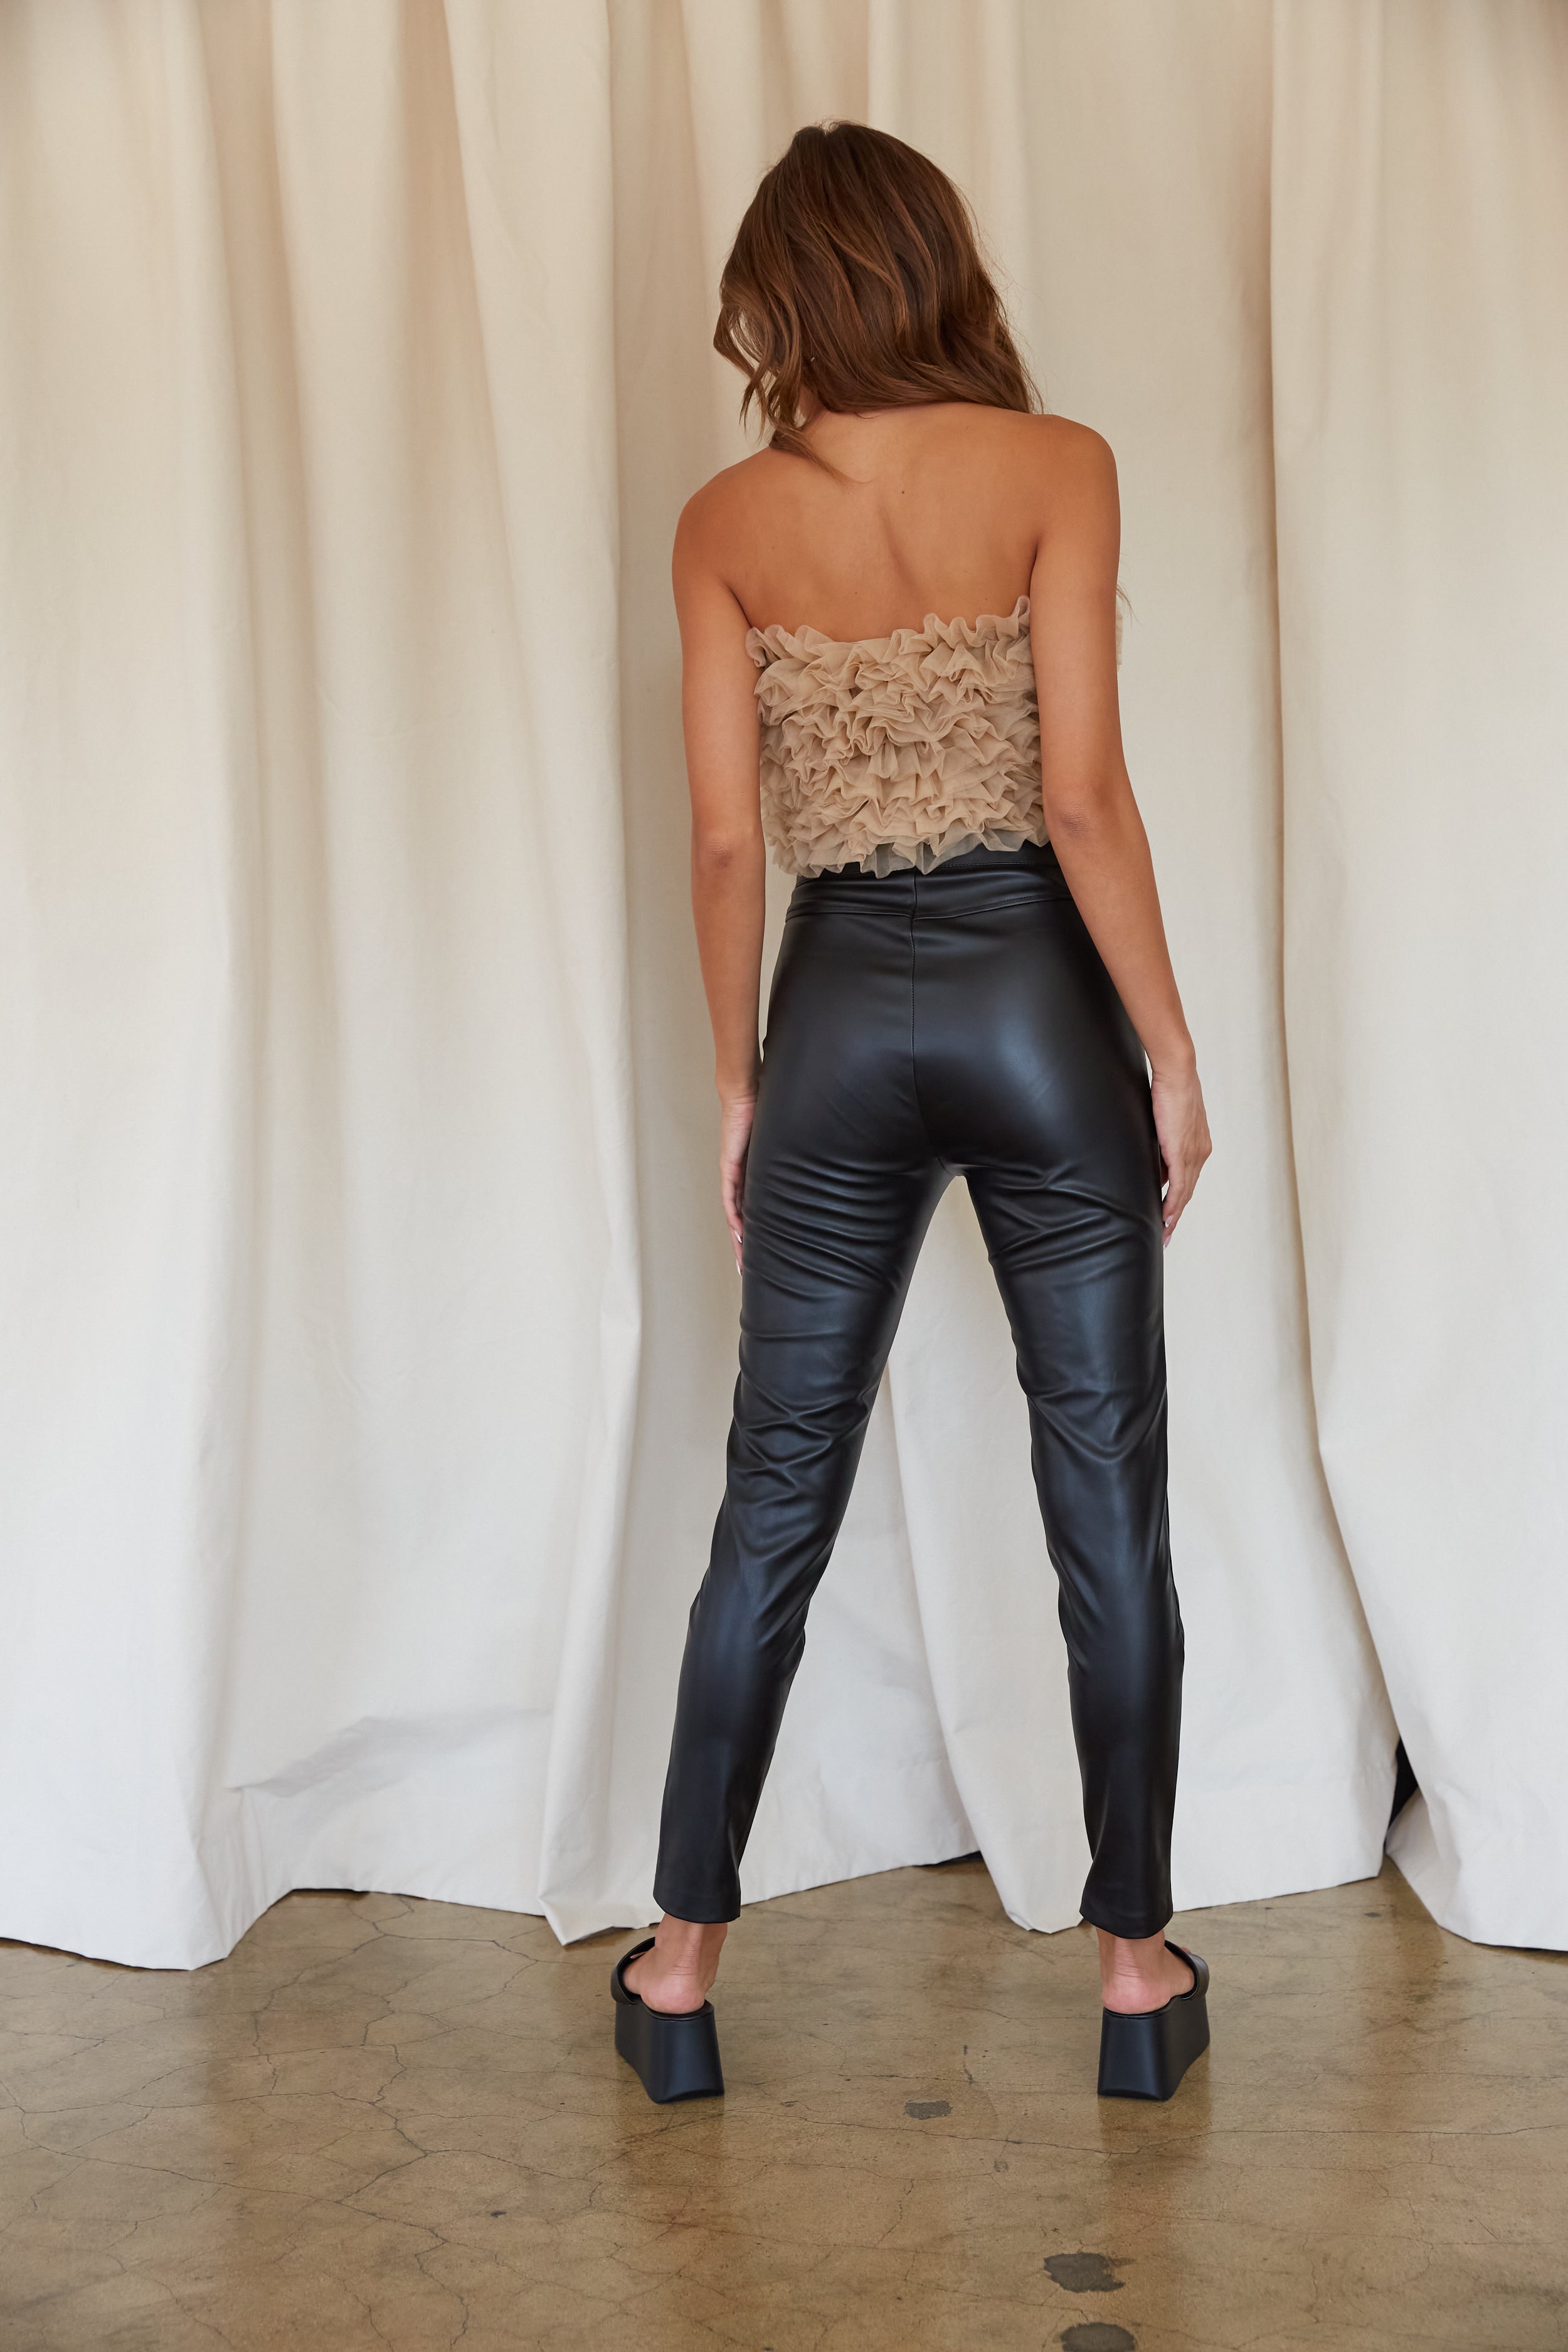 9 Ways to Style Black Leather Pants for UltraSleek 90s Vibes